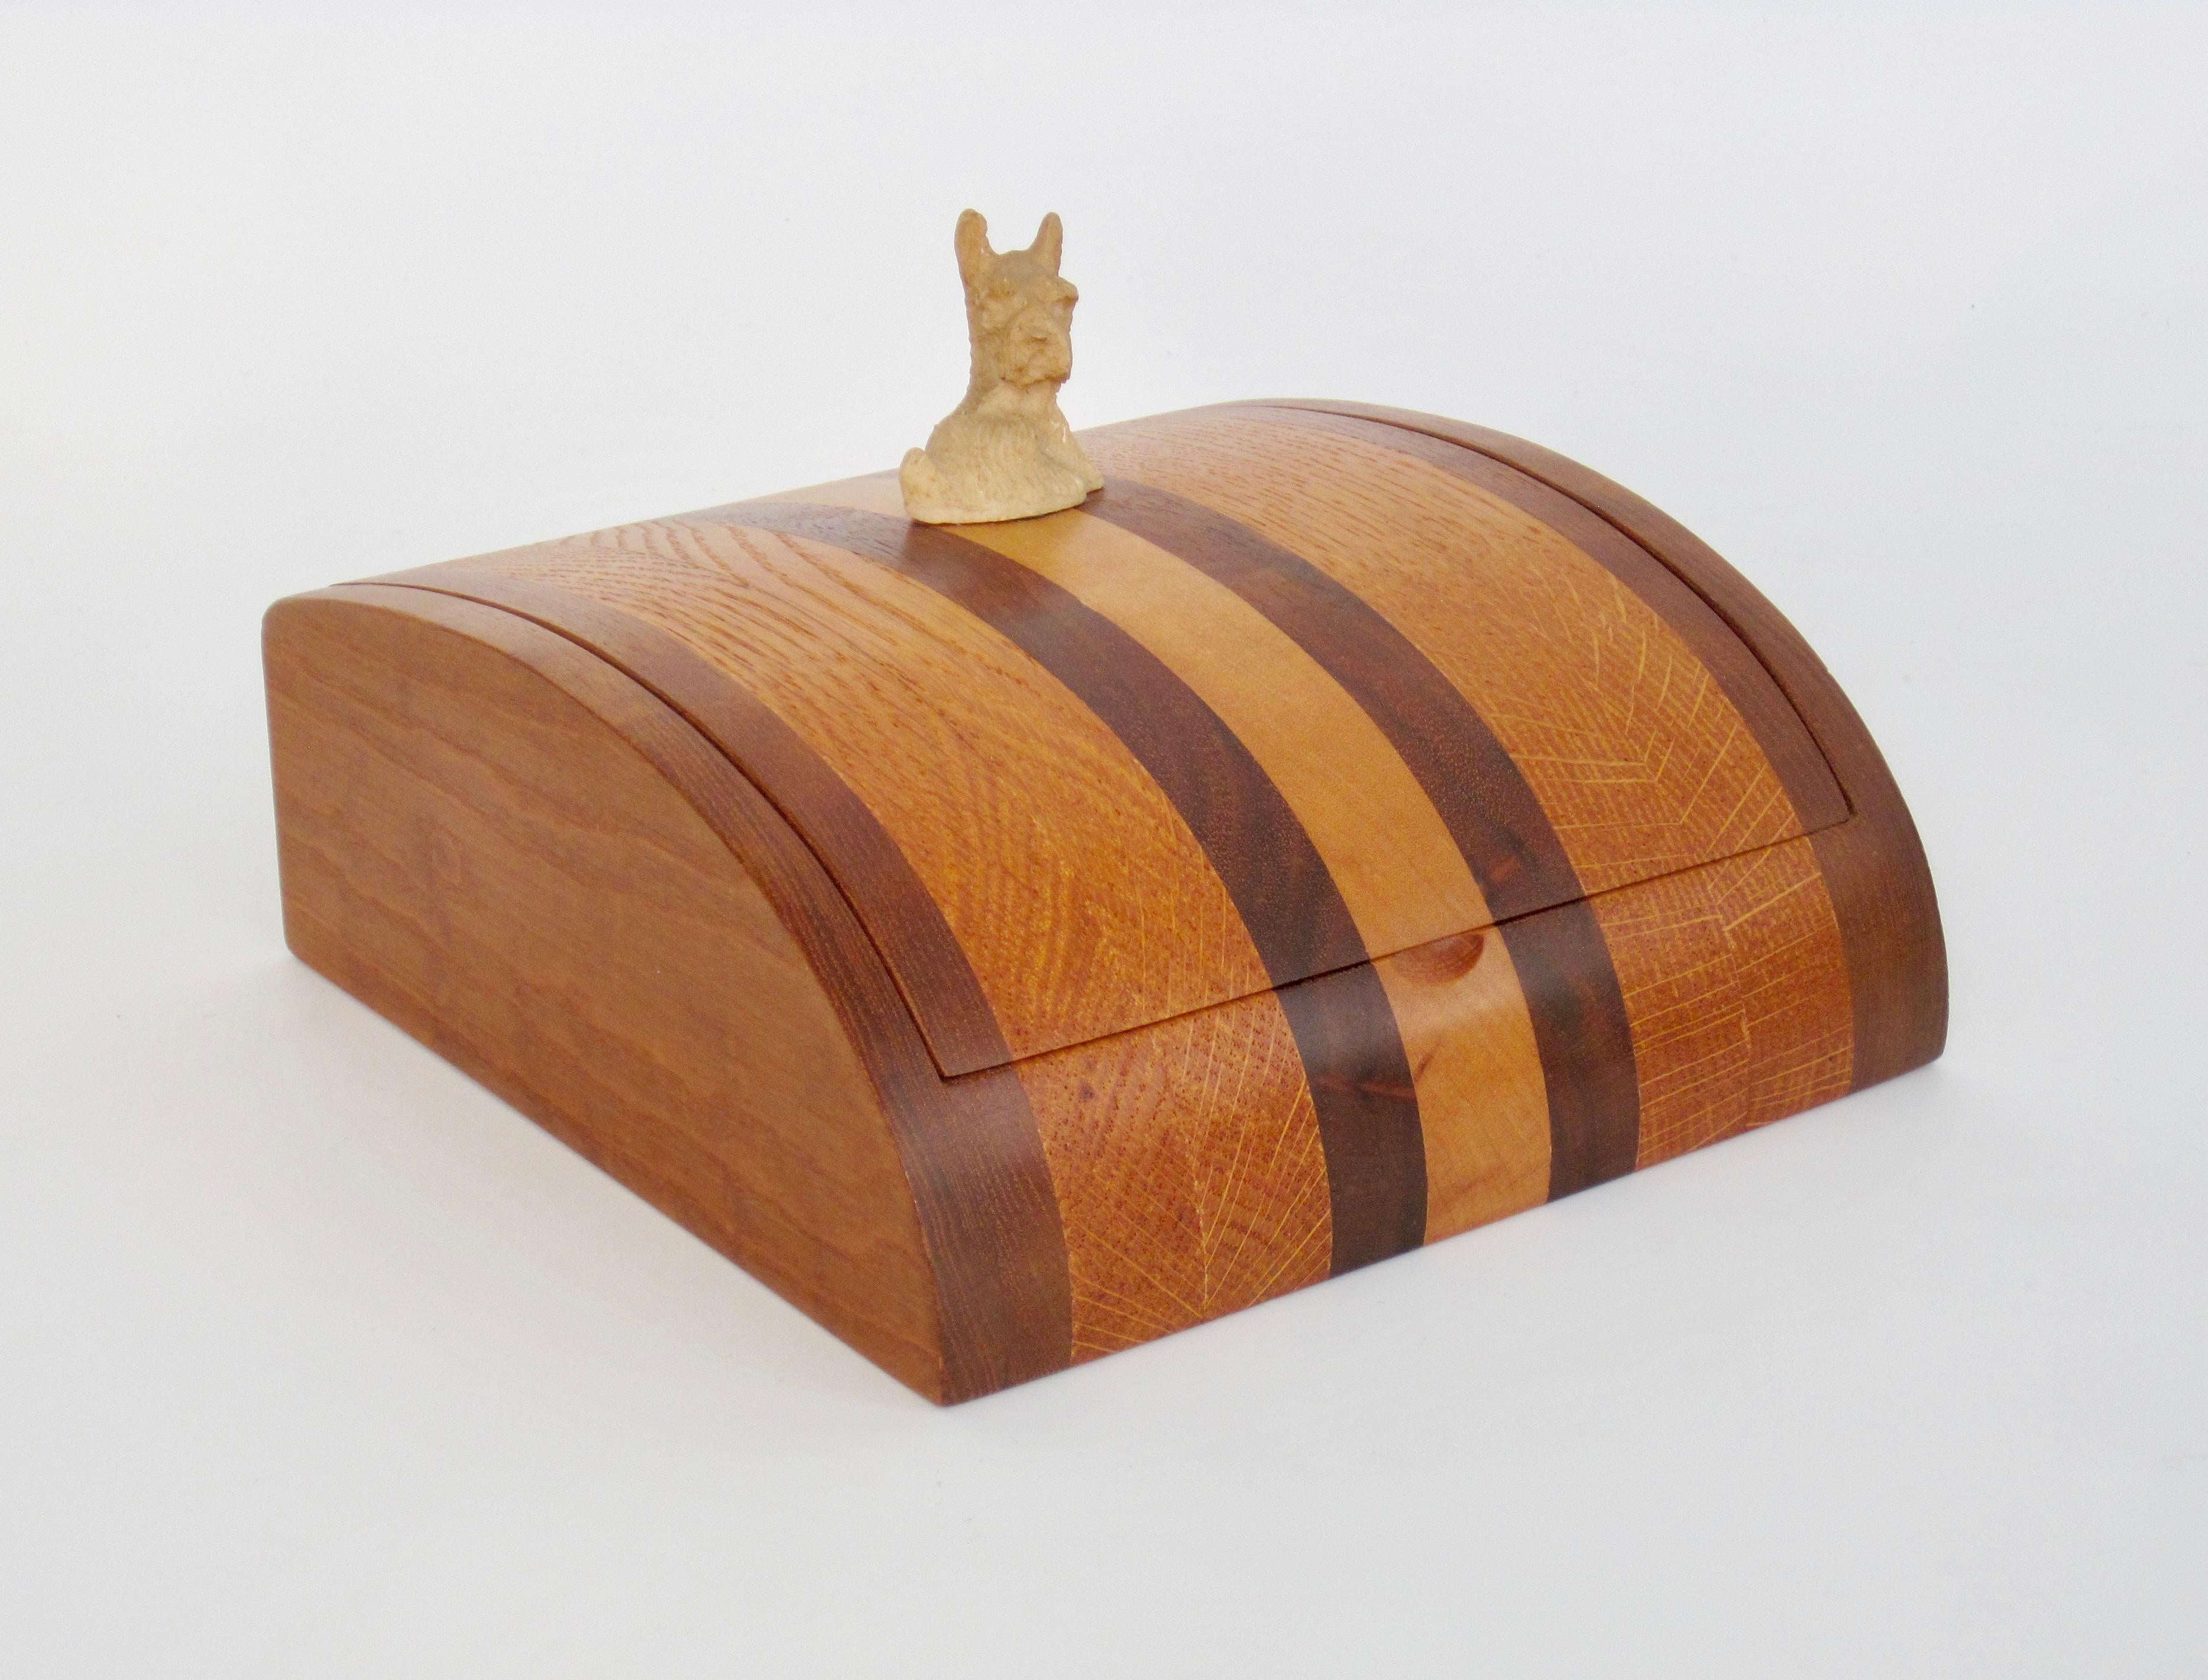 A finely constructed, studio made, banded walnut and maple dowel hinge box. The wood hinges allow the top to open effortlessly. The polished exterior and curved top really show off woodgrain nicely.  We love how the scottie dog is a nod the Art Deco